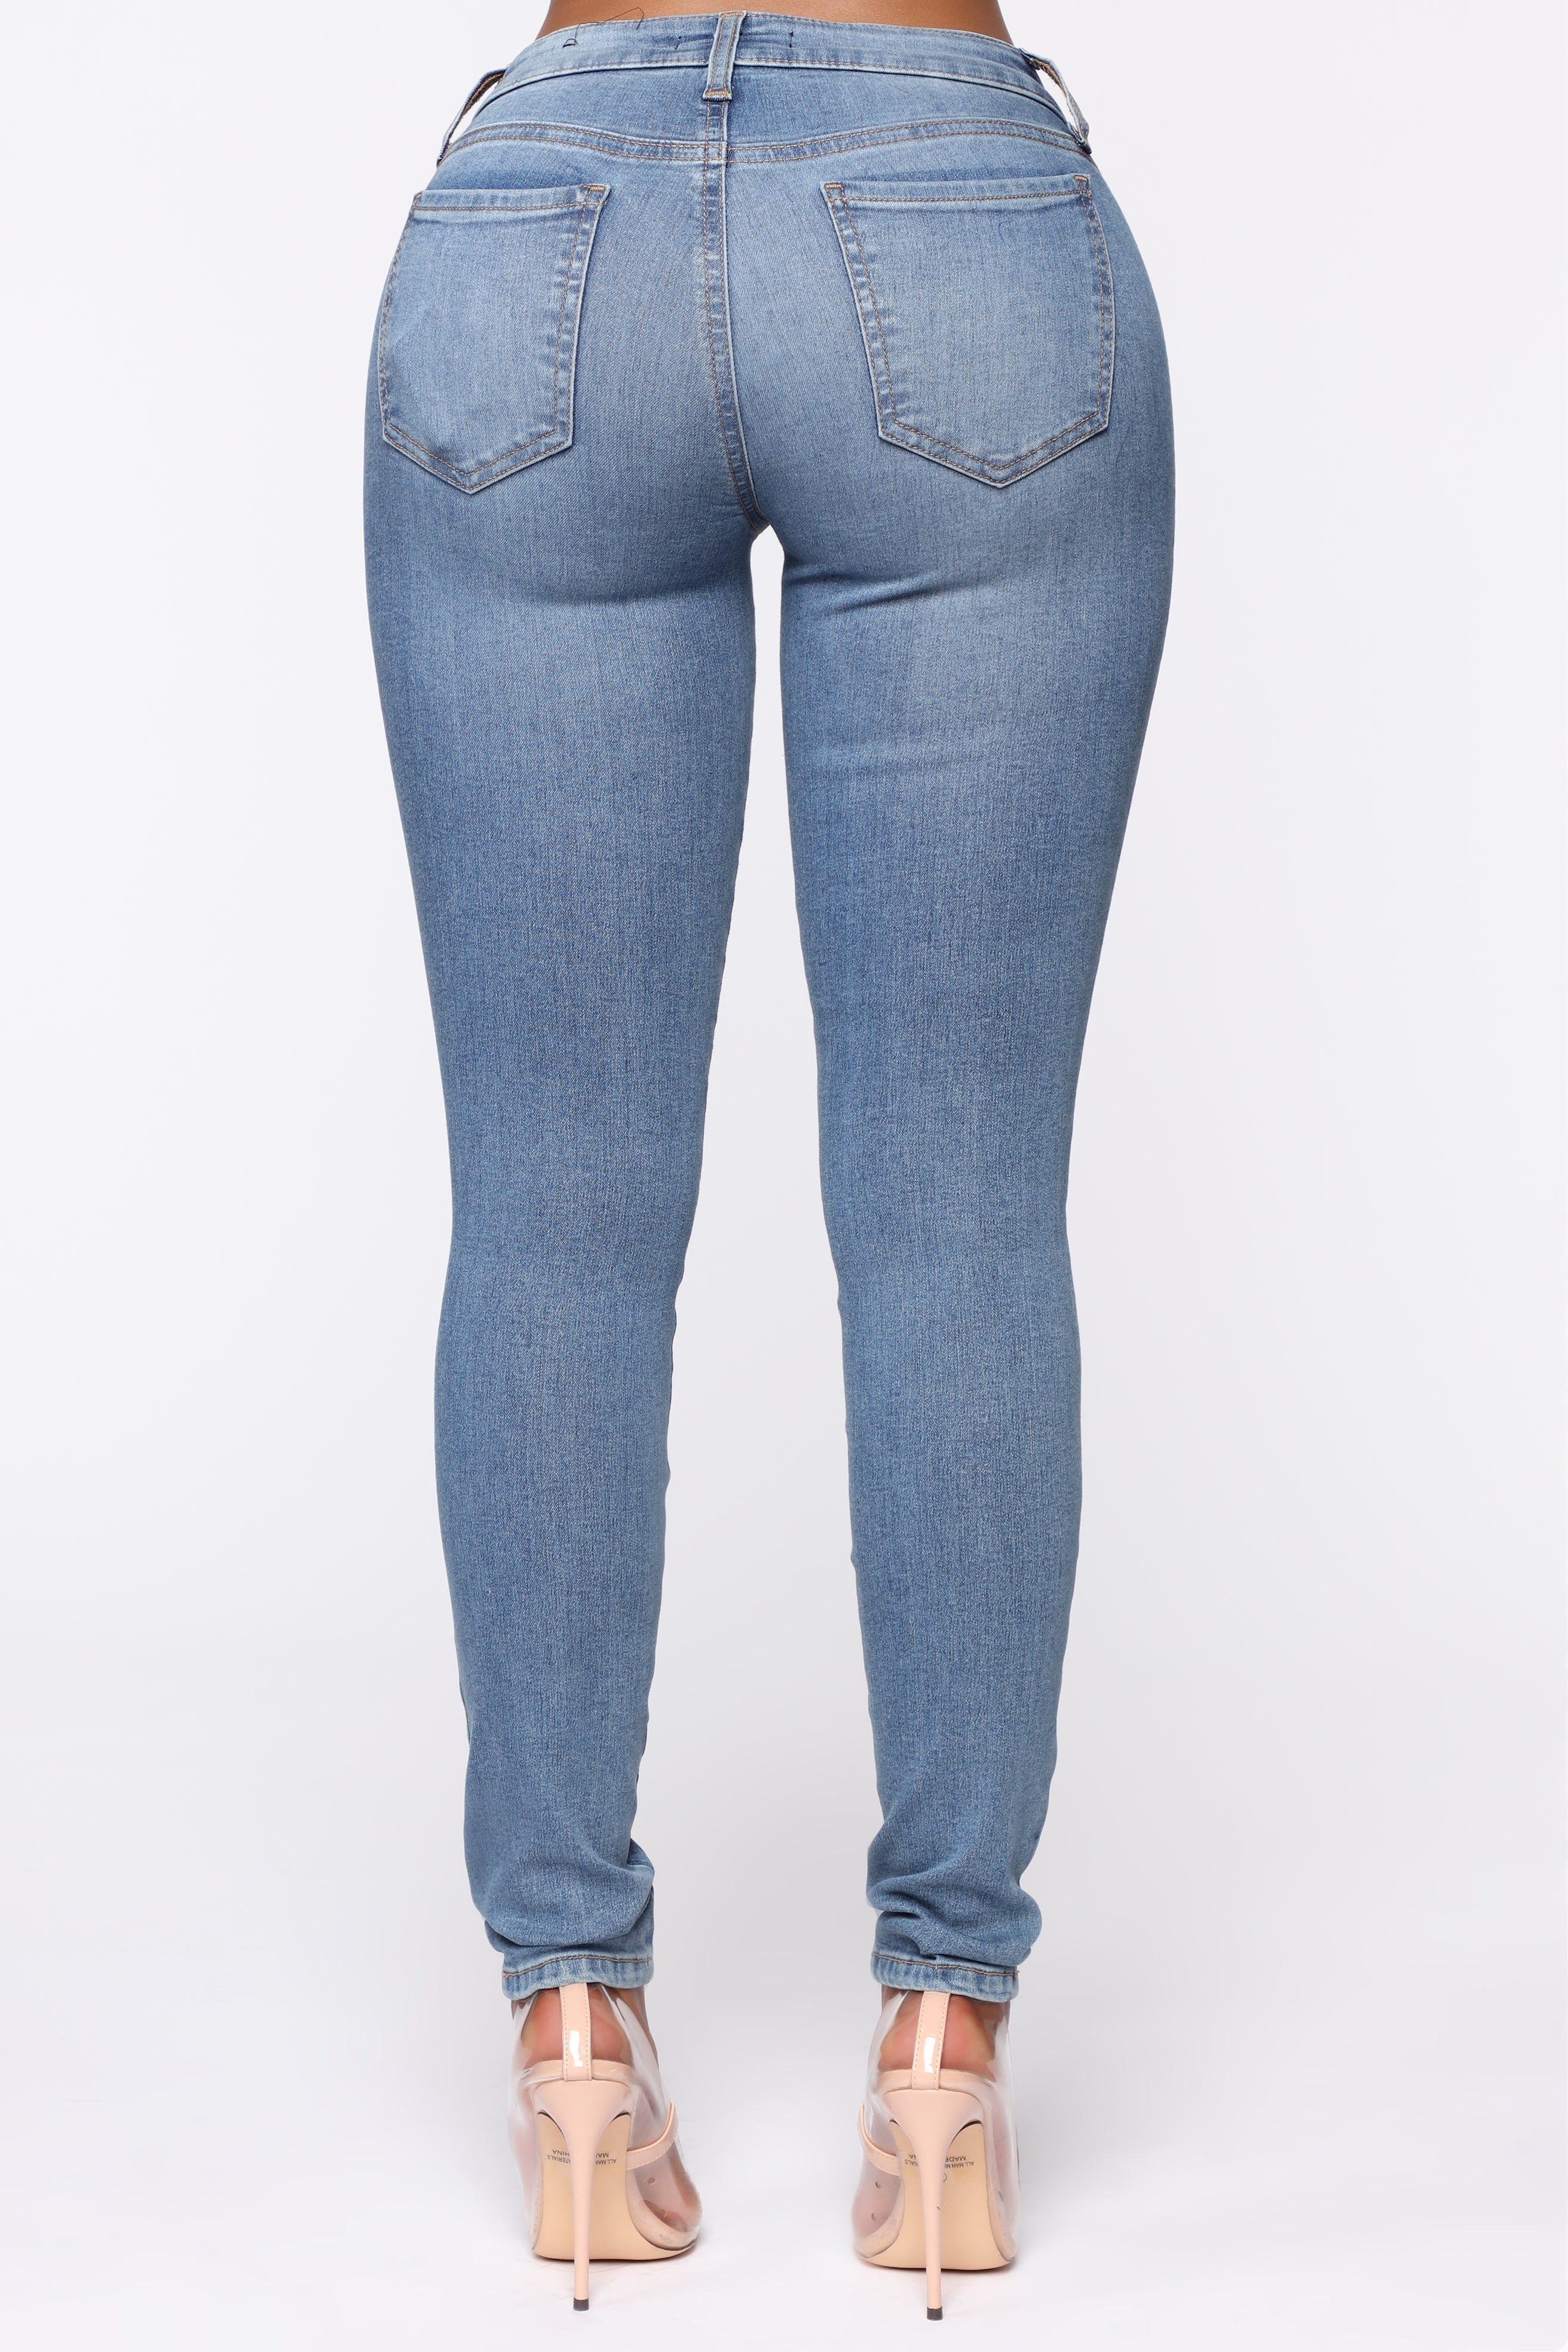 Flex Game Strong Low Rise Skinny Jeans - Light Blue Wash